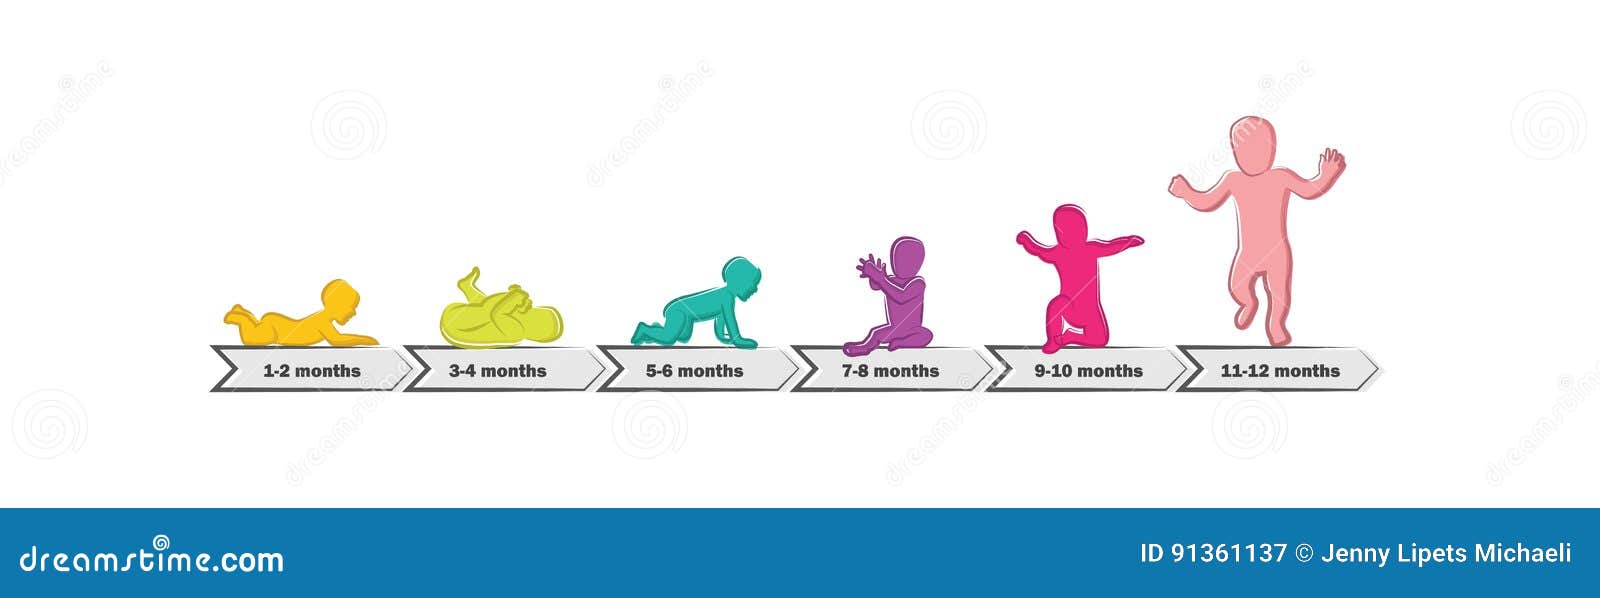 baby development stages milestones first one year . timeline of child milestones of the first year